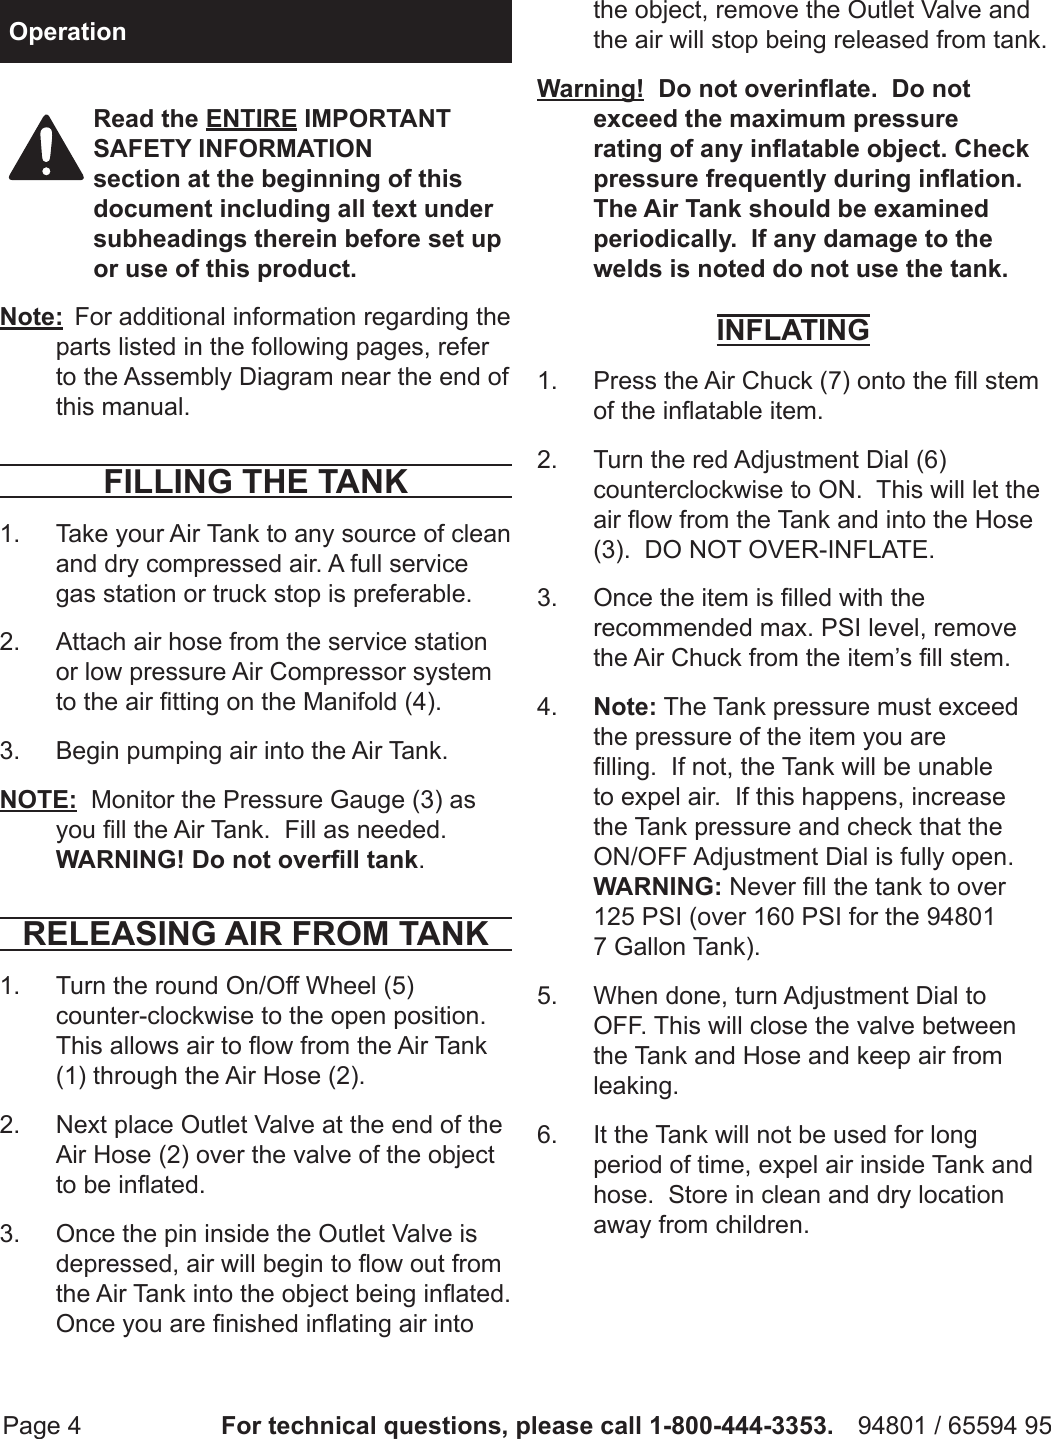 Page 4 of 7 - Harbor-Freight Harbor-Freight-11-Gal-Portable-Air-Tank-Product-Manual-  Harbor-freight-11-gal-portable-air-tank-product-manual